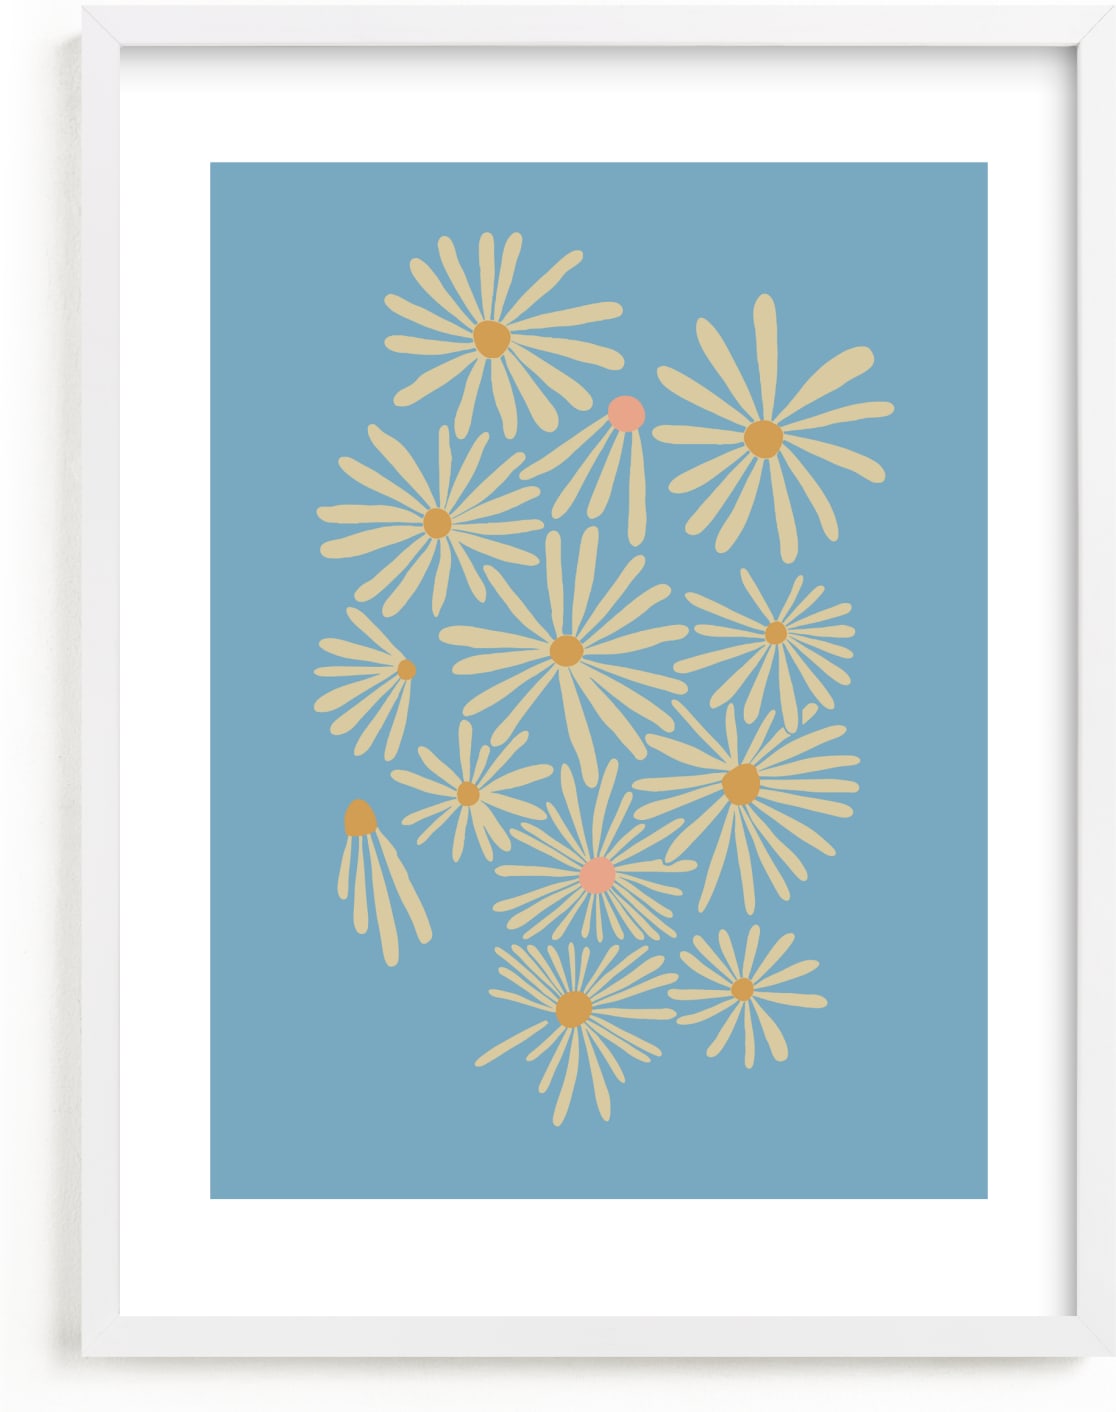 This is a blue kids wall art by Kate Capone called Vintage Floral Set II.